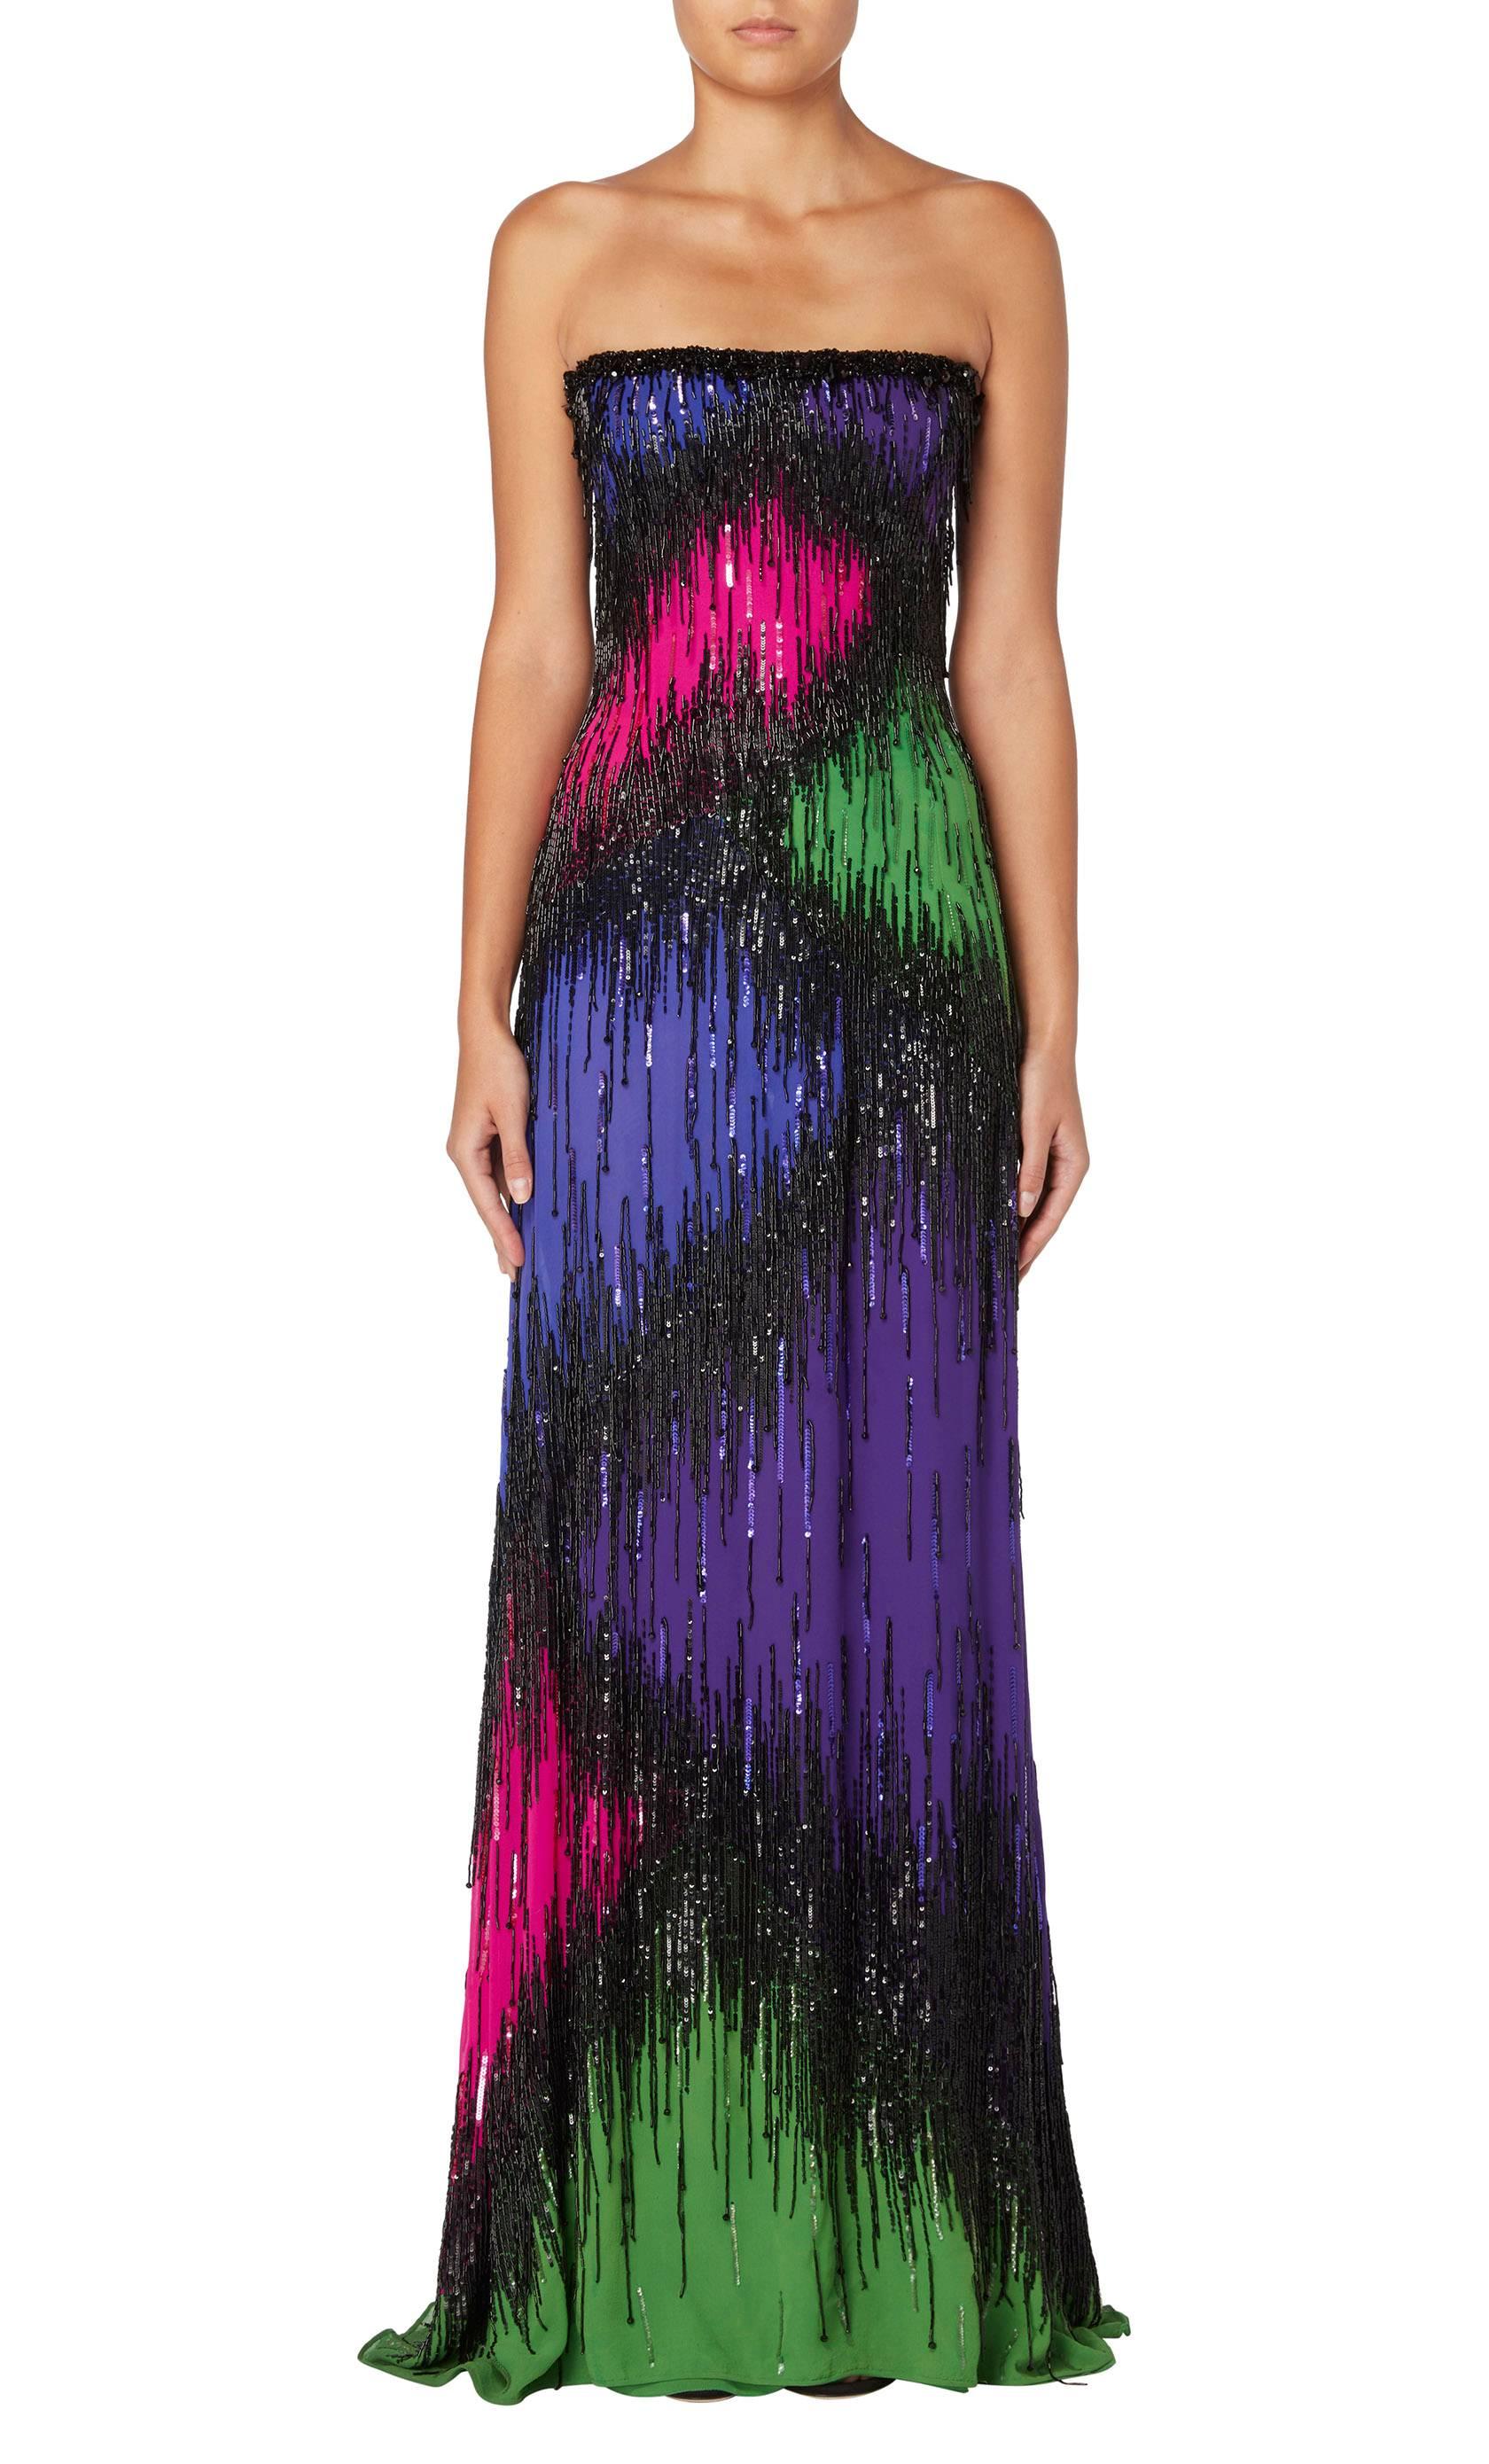 A bold evening option, this Balestra gown will be sure to make a statement on the red carpet. Constructed in bright purple, pink and green silk jersey, the strapless gown has a silk chiffon overlay embellished with black beads and sequins. With an